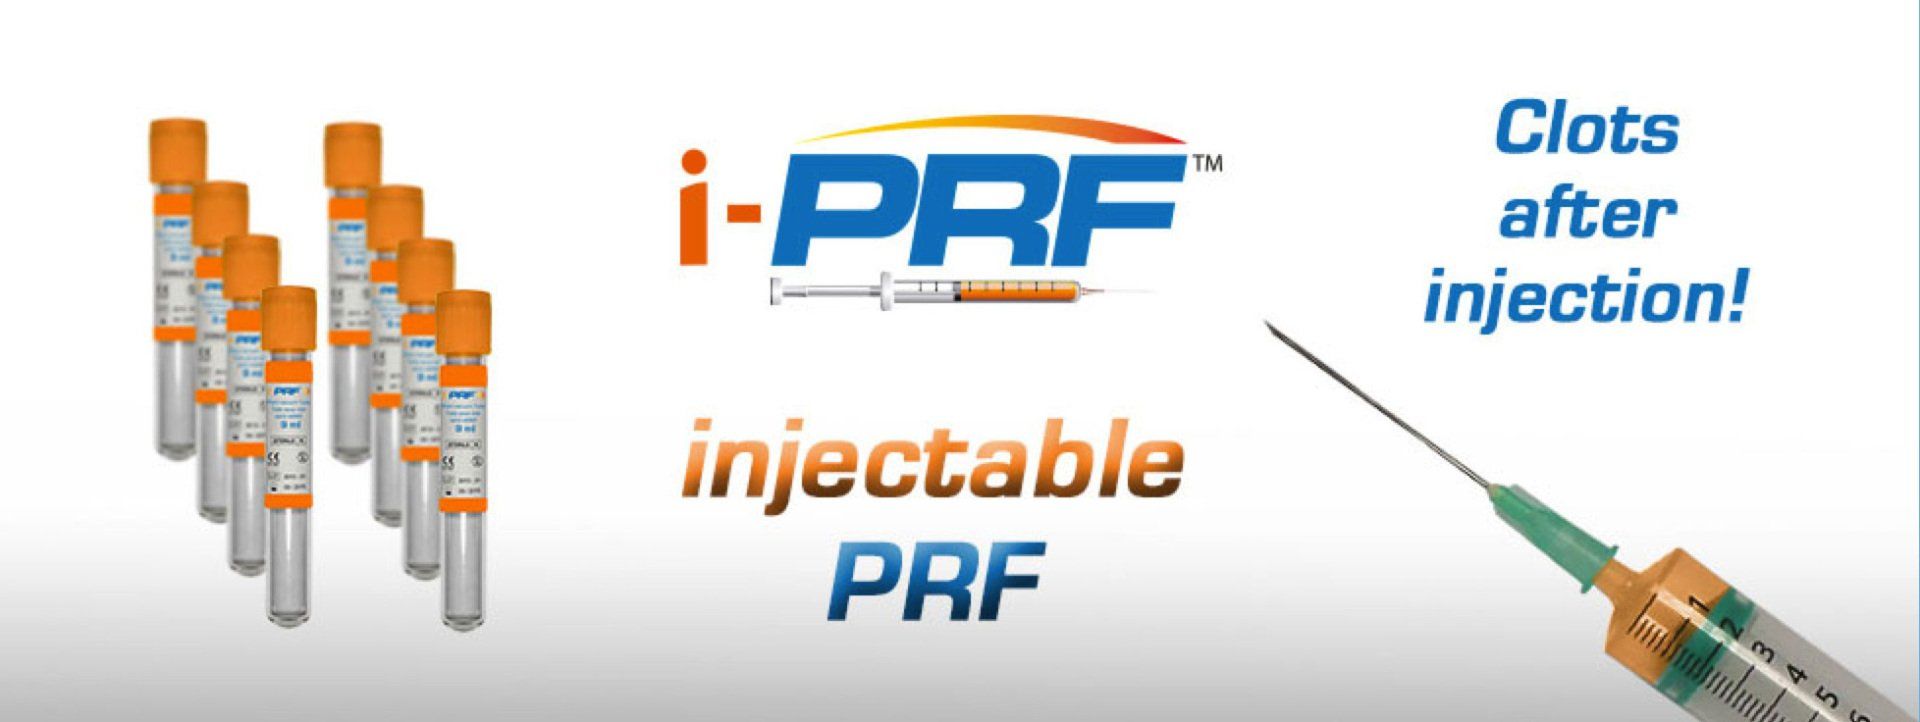 PRF Injections